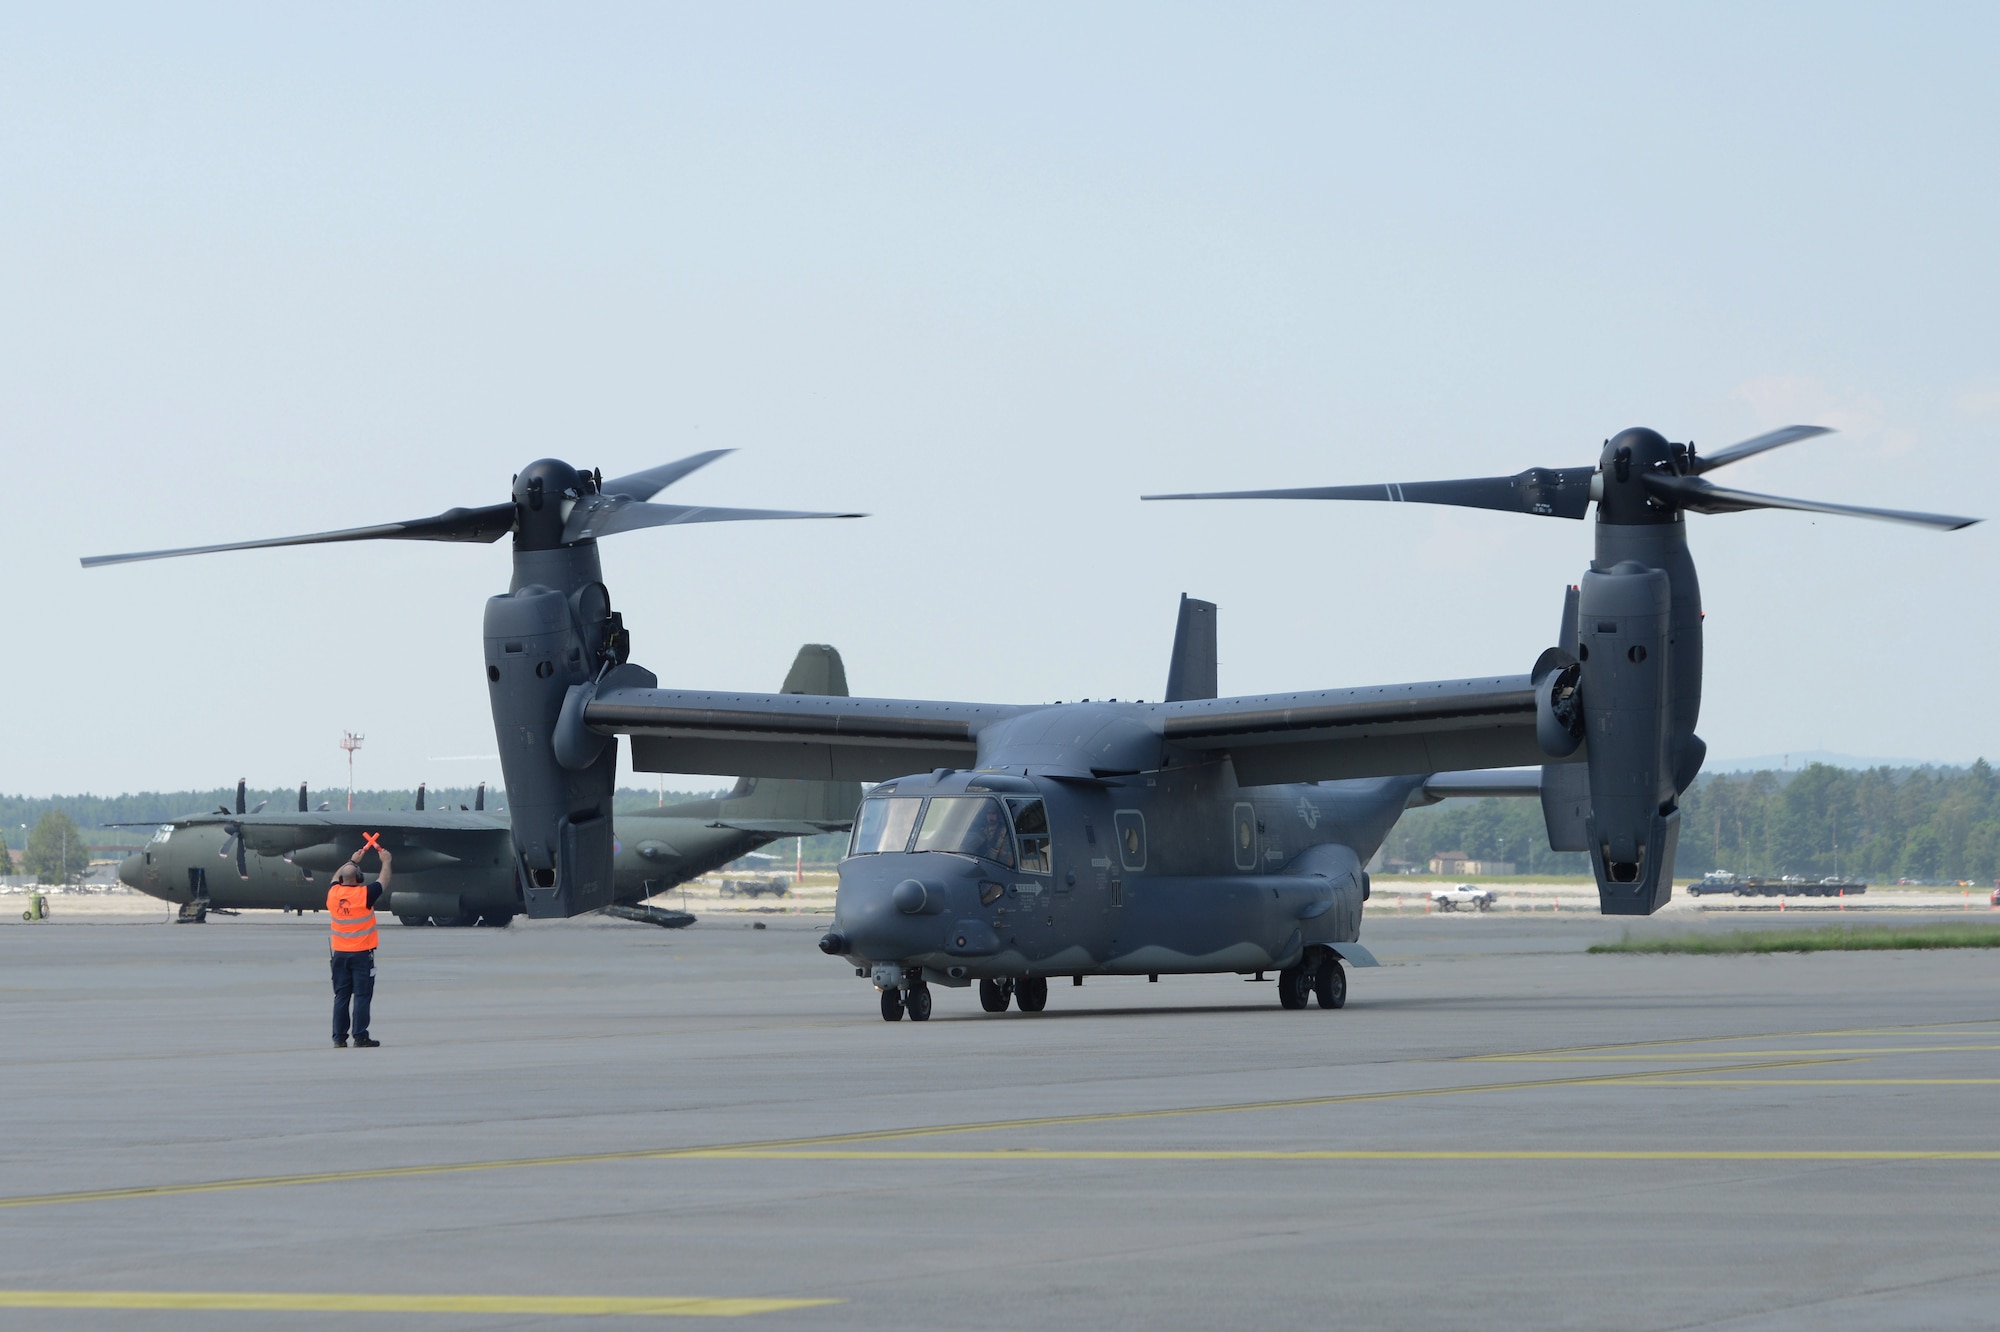 A CV-22 Osprey assigned to the 7th Special Operations Squadron at Royal Air Force Mildenhall, England, transits through Ramstein Air Base, Germany  June 6, 2016. Airmen from the 7th SOS participated in the D-Day remembrance airdrops at Normandy, France, where they supported military free-fall jumps. (U.S. Air Force Photo/ Airman 1st Class Joshua Magbanua)